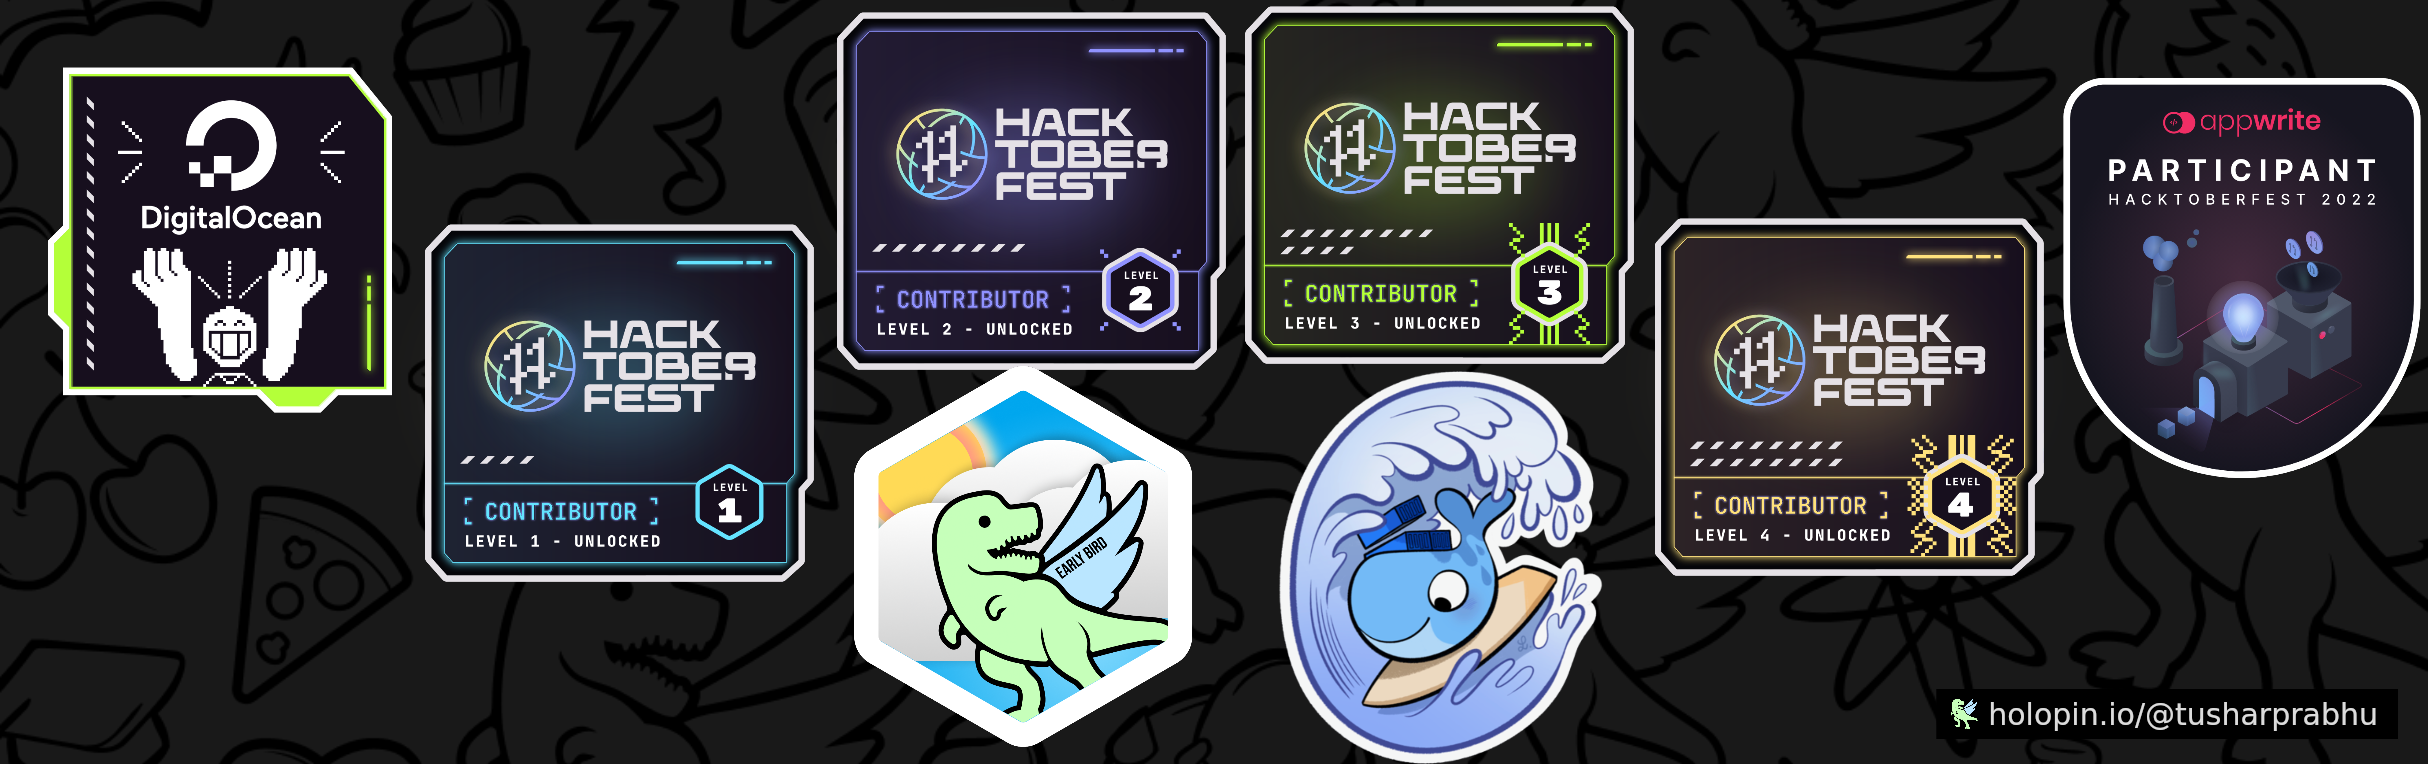 An image of @tusharprabhu's Holopin badges, which is a link to view their full Holopin profile